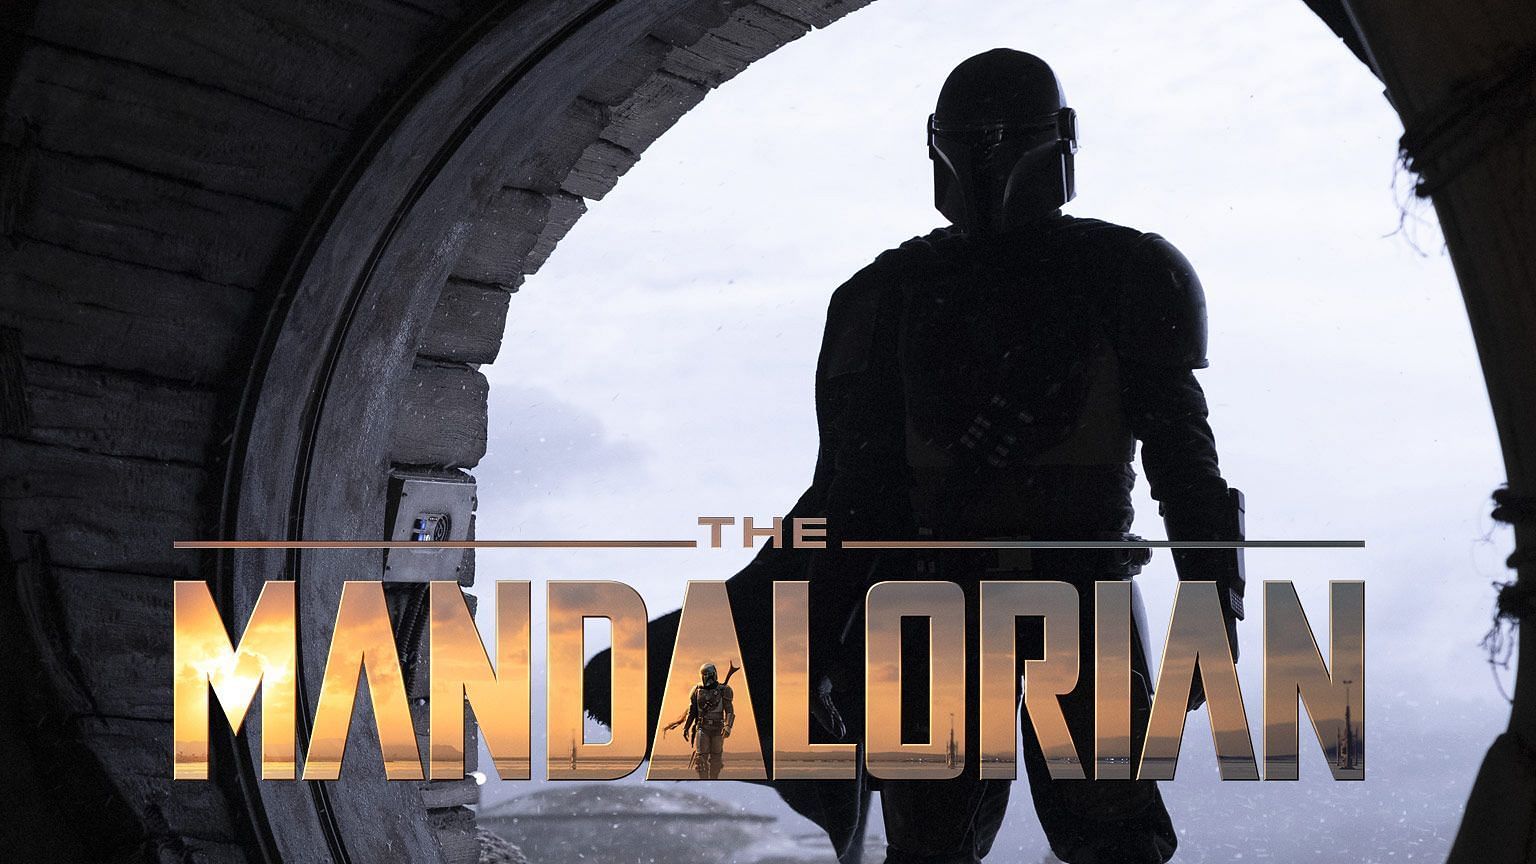 When does The Mandalorian take place?